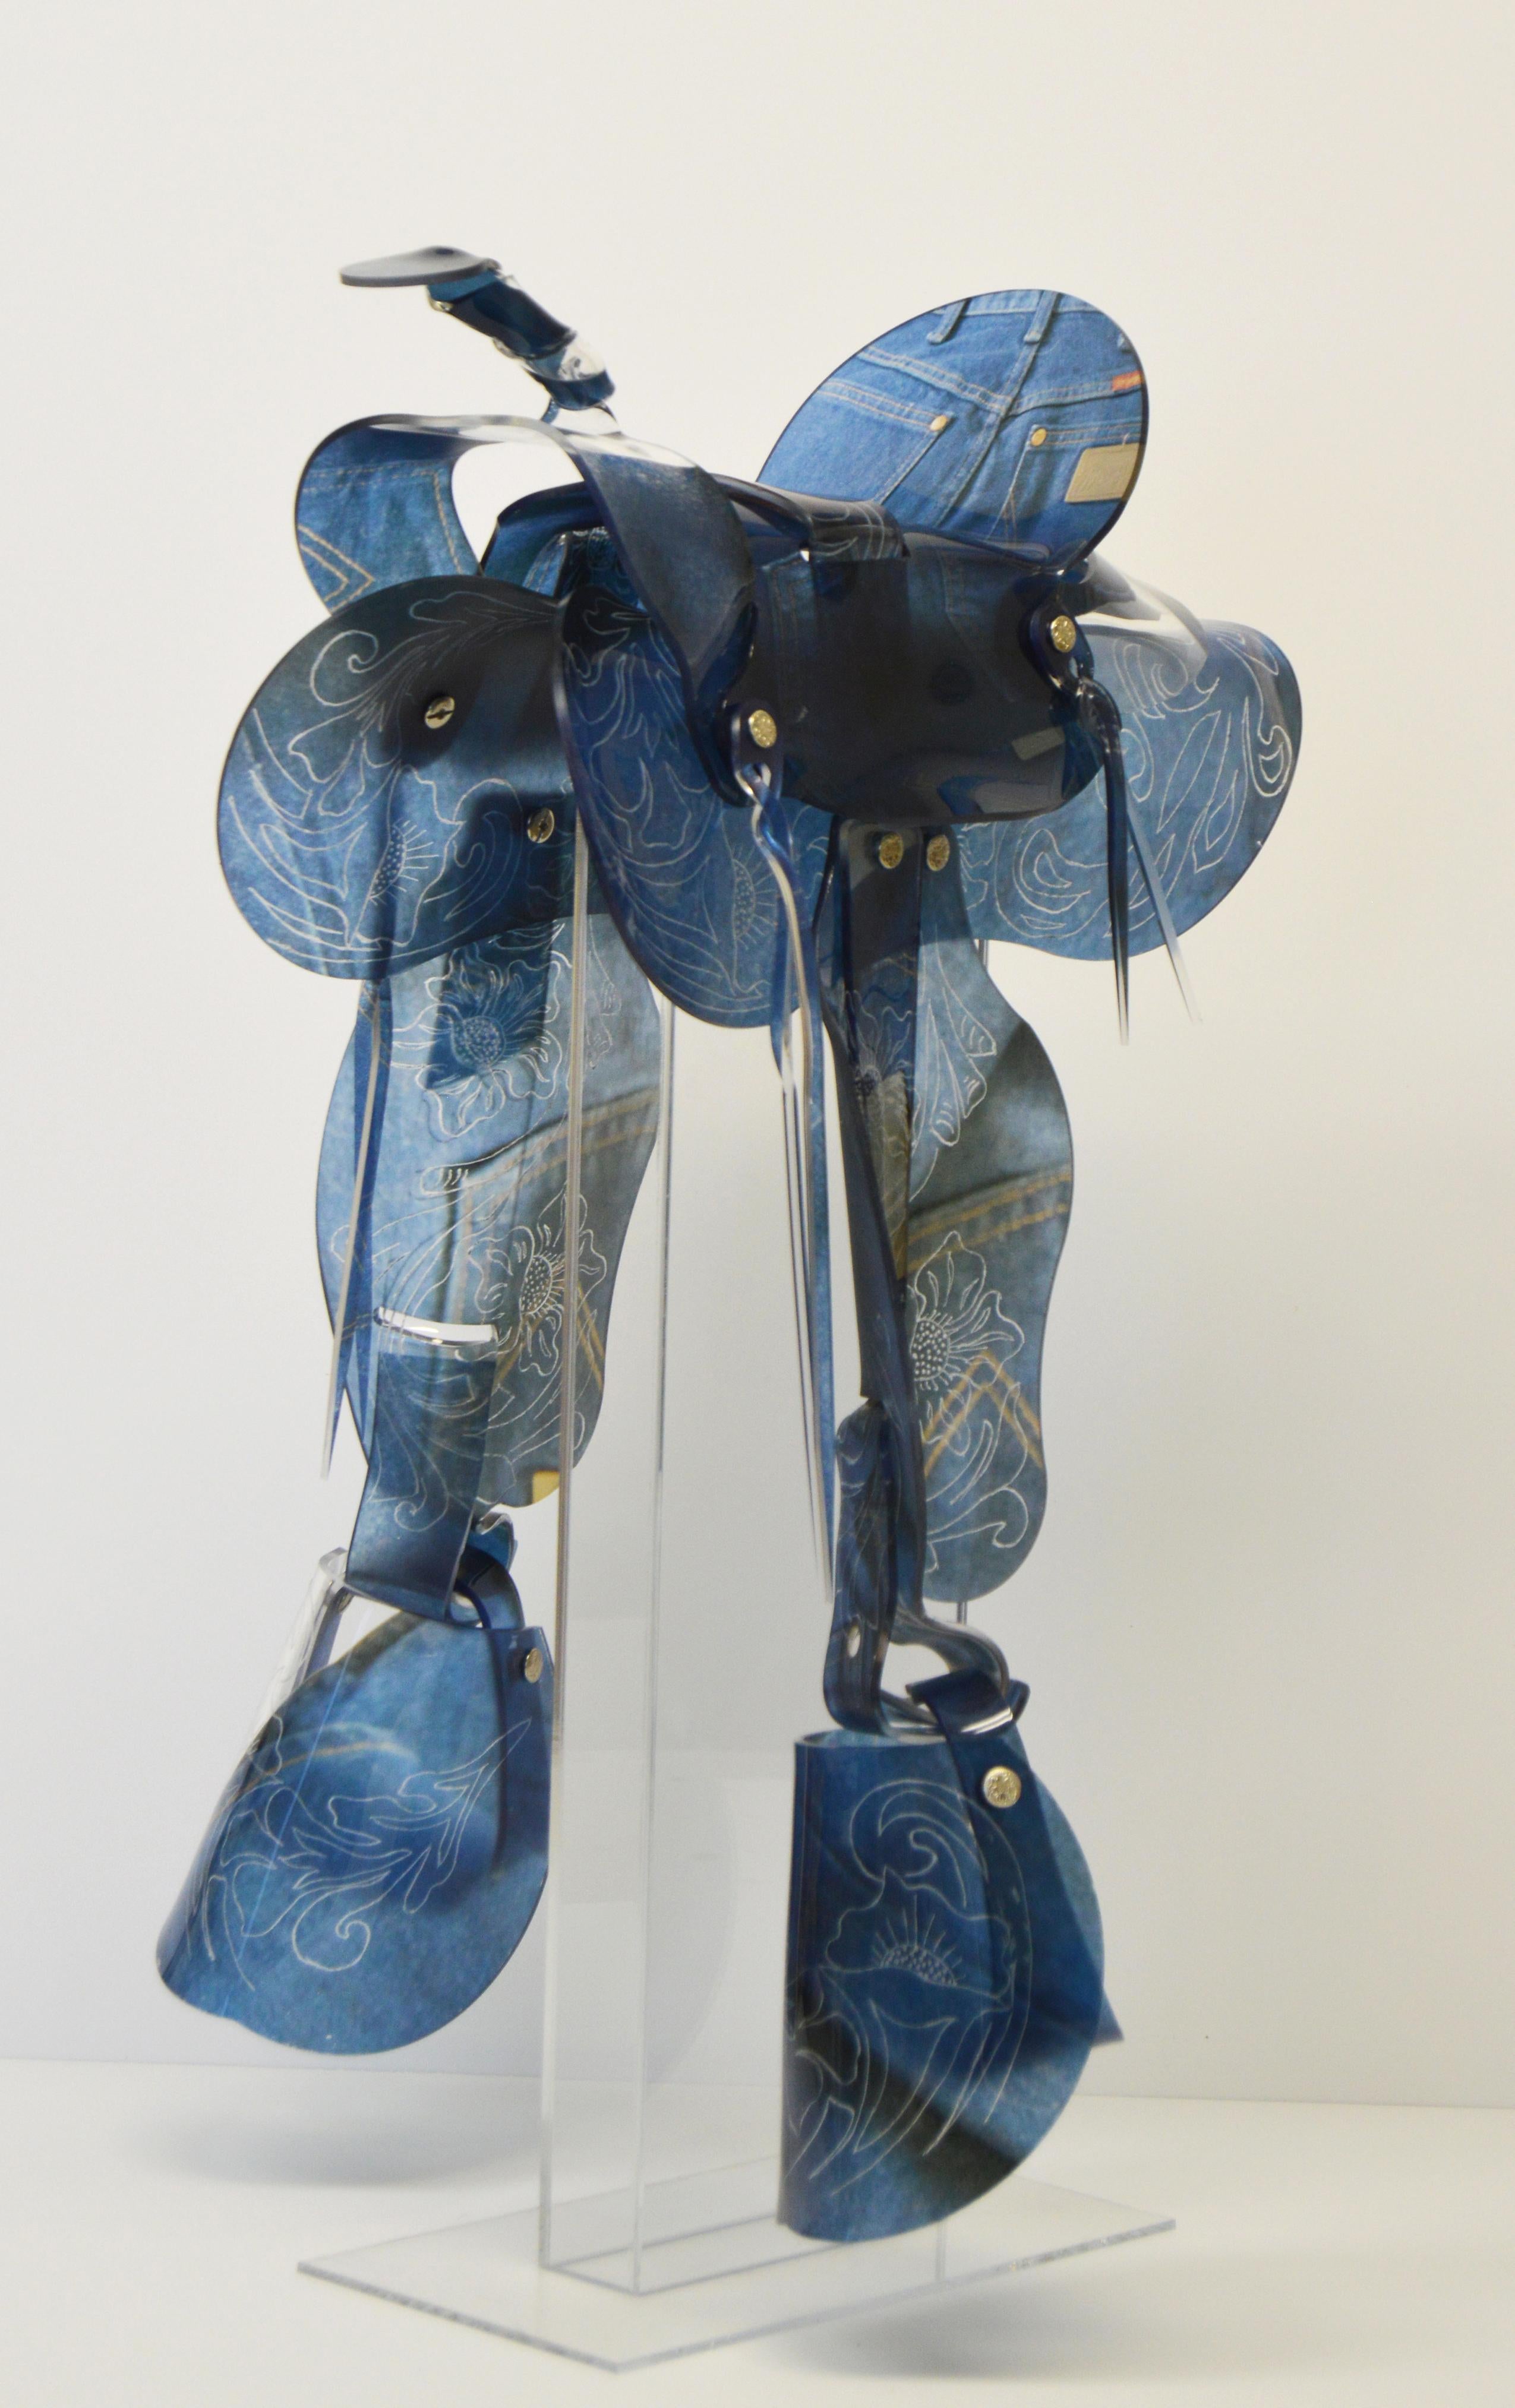 Maeve Eichelberger Figurative Sculpture - "Rodeo Ben" - UV inks printed on acrylic hand formed